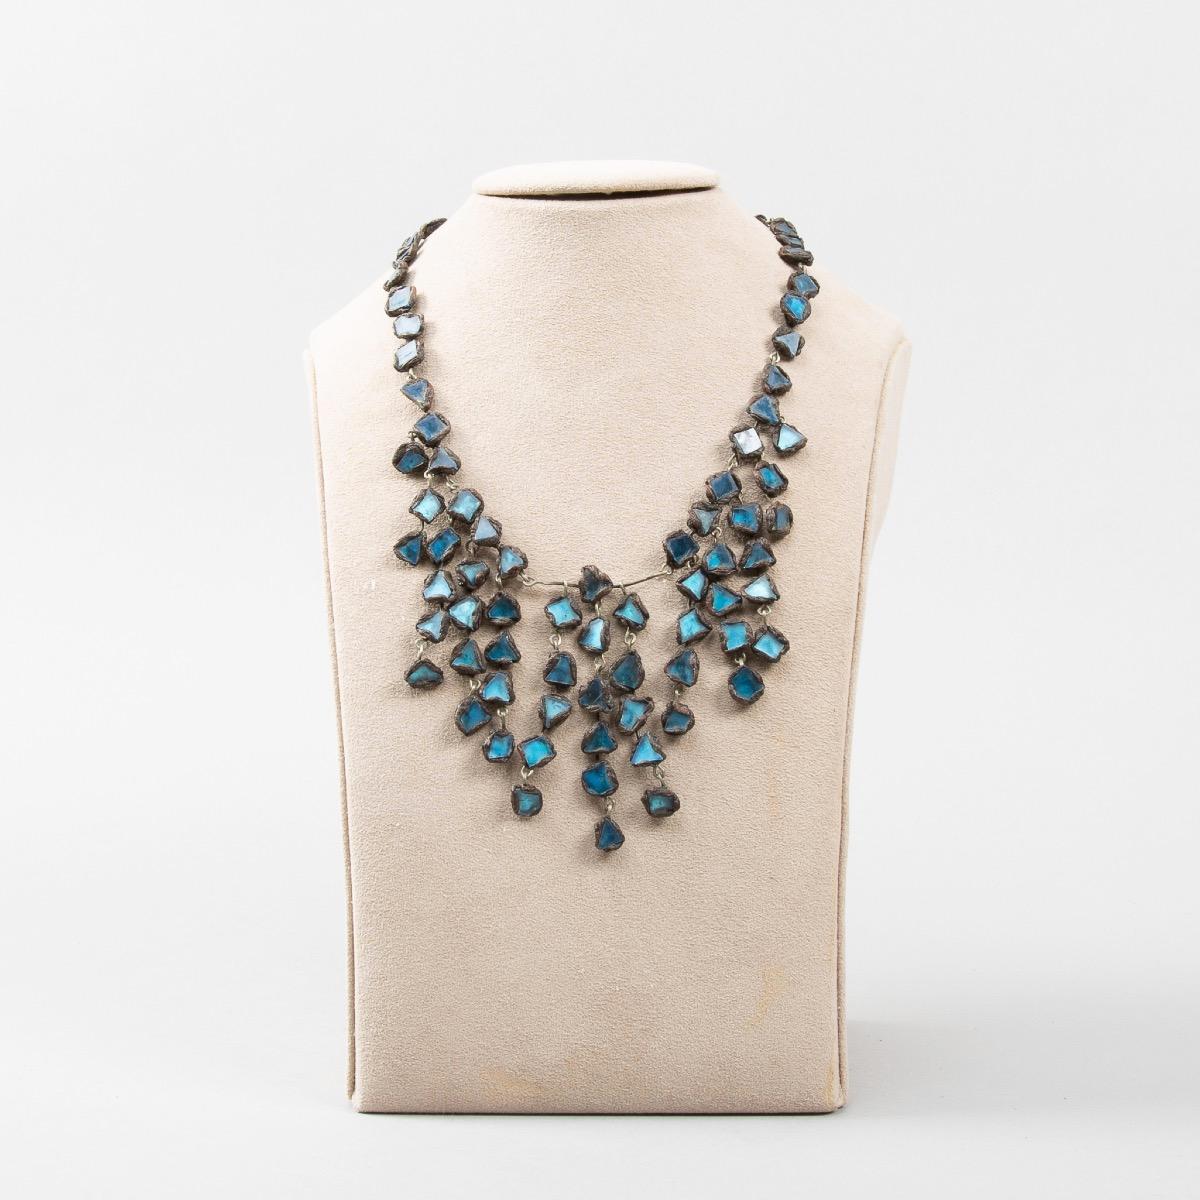 Line Vautrin called herself this model of necklace 